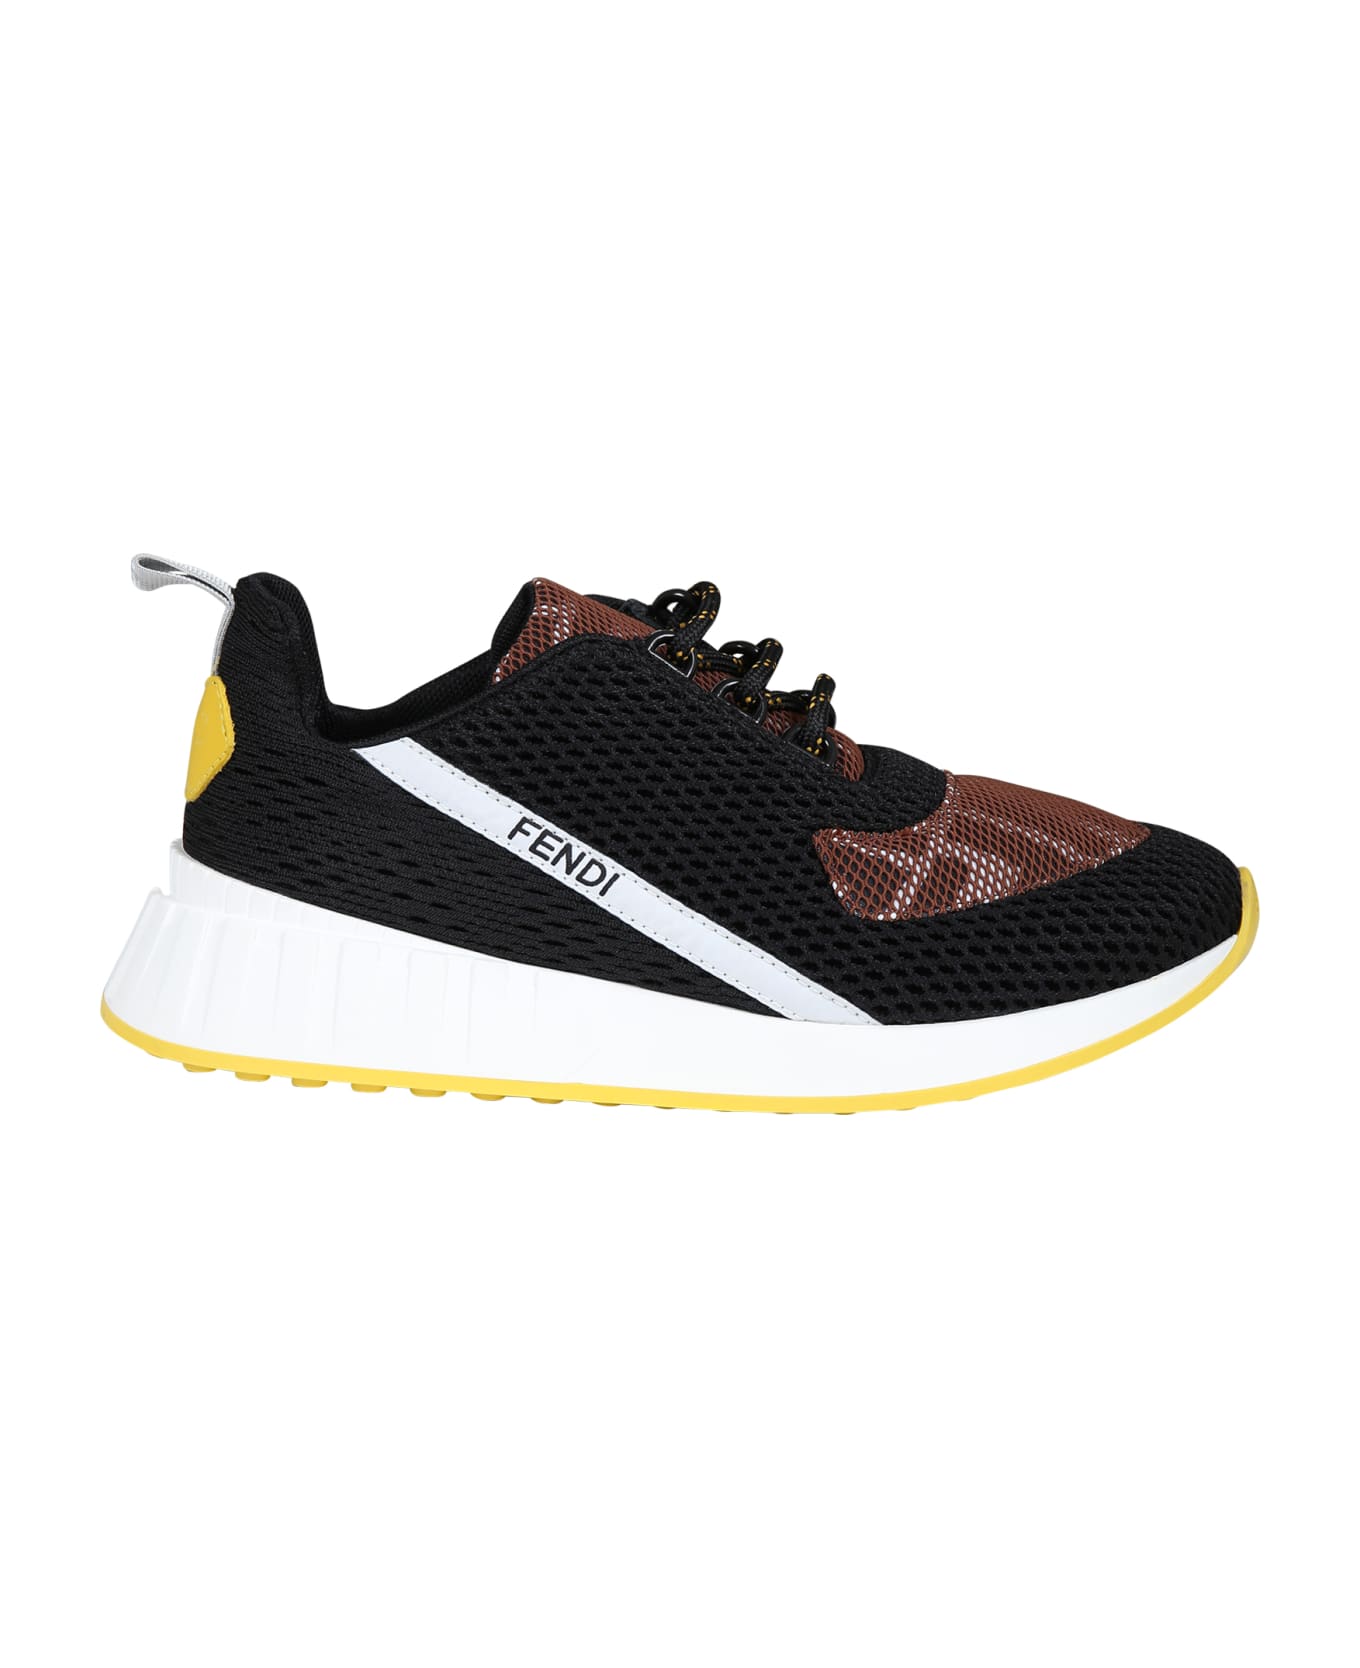 Fendi Black Sneakers For Kids With Iconic Double F - Nero